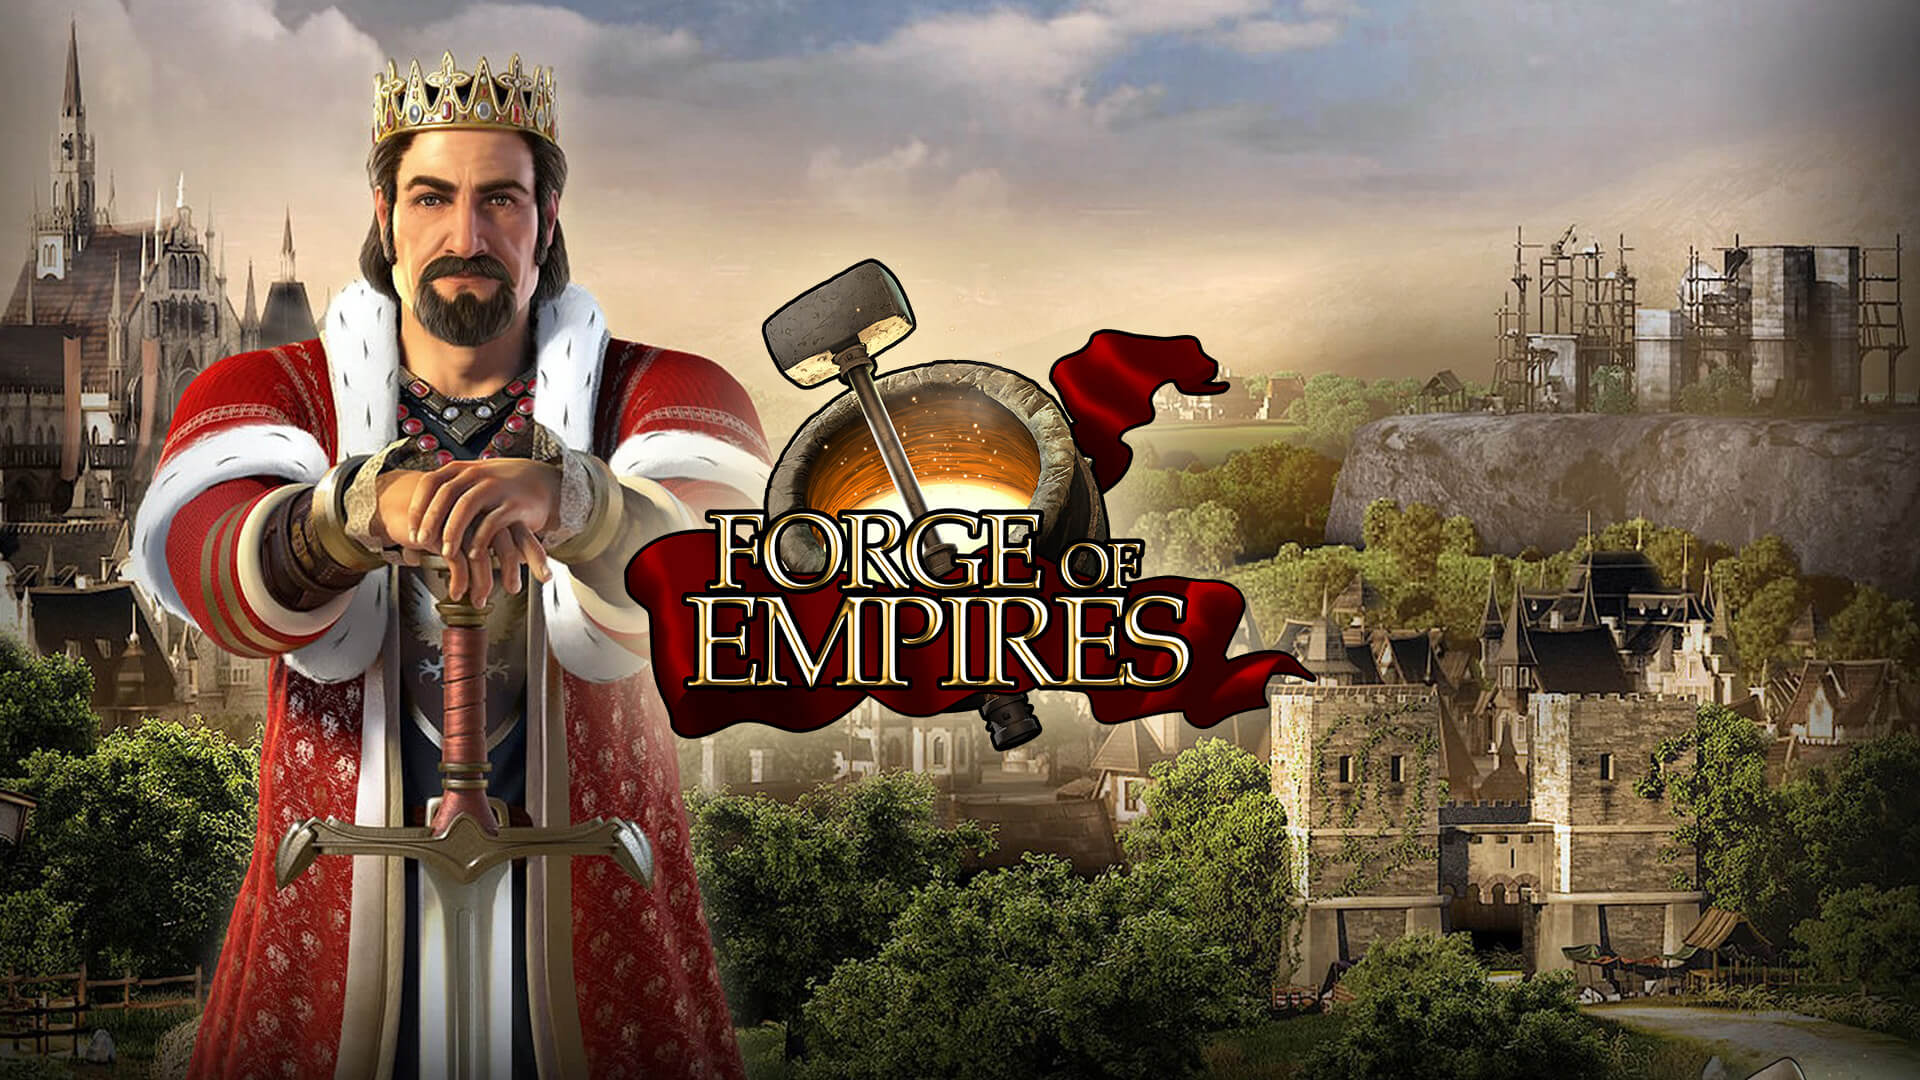 Forge of Empires official logo